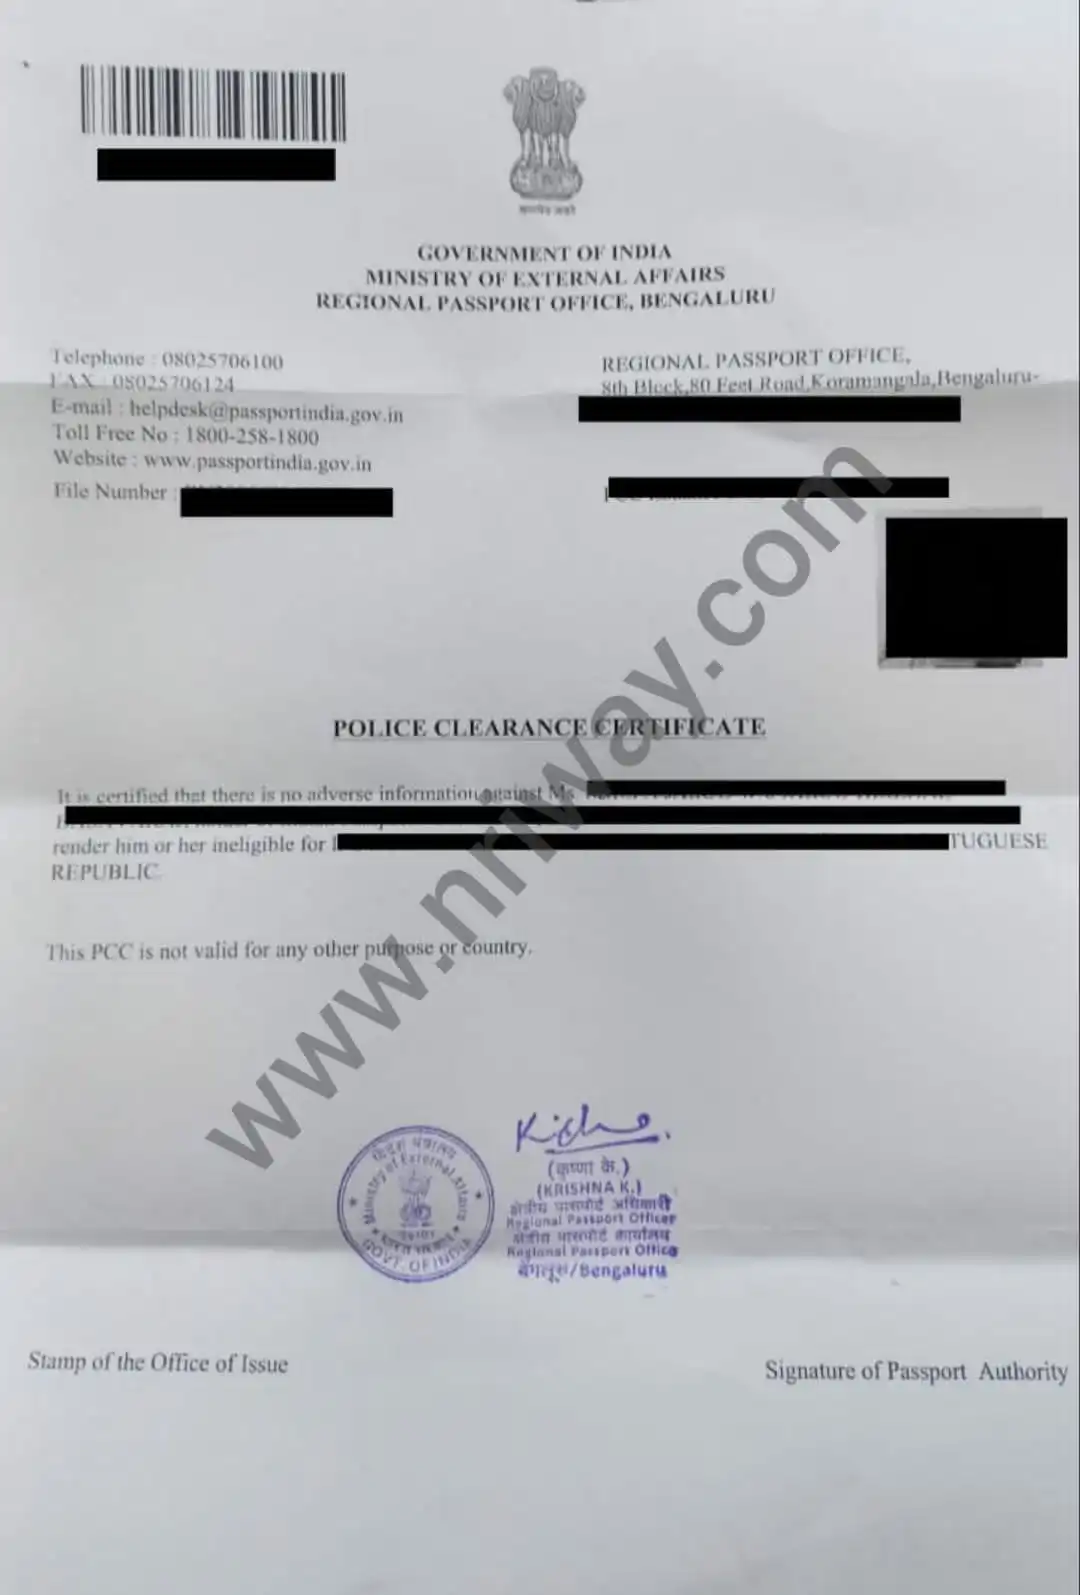 Police clearance certificate from India